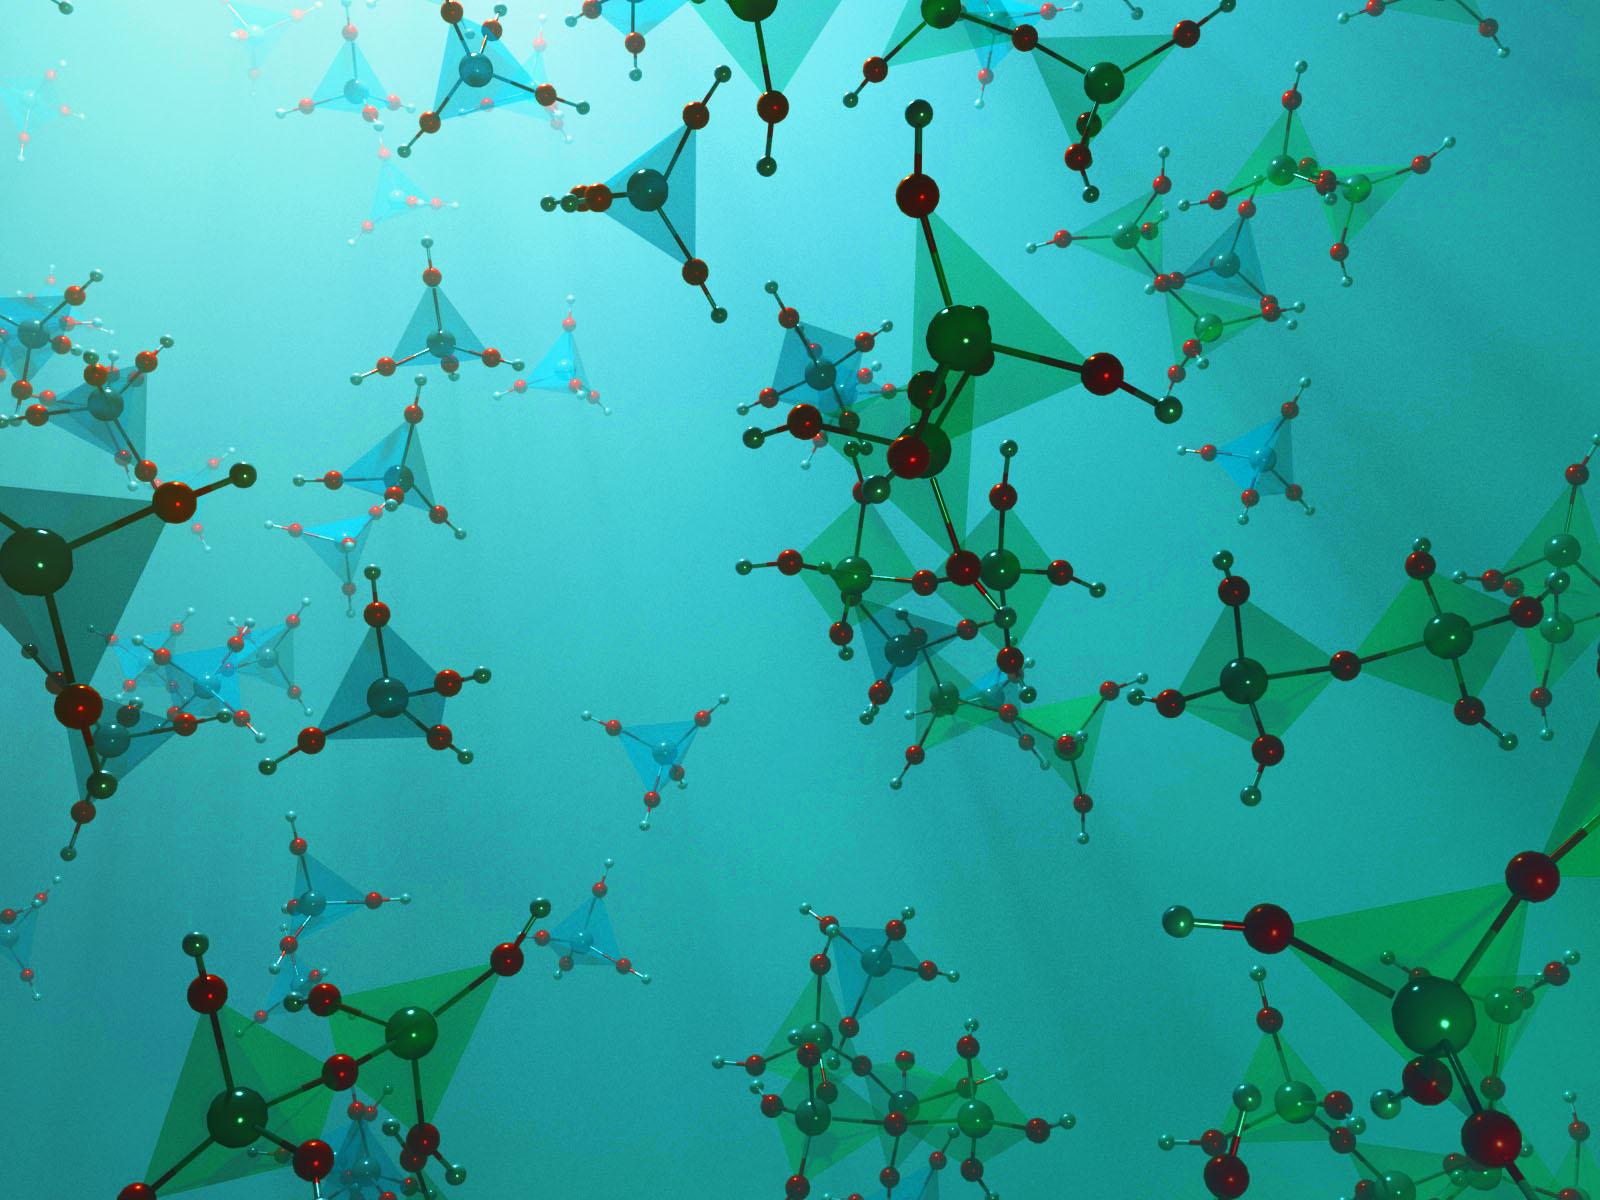 Molecules with shaded structural pyramids floating on a blue-green background